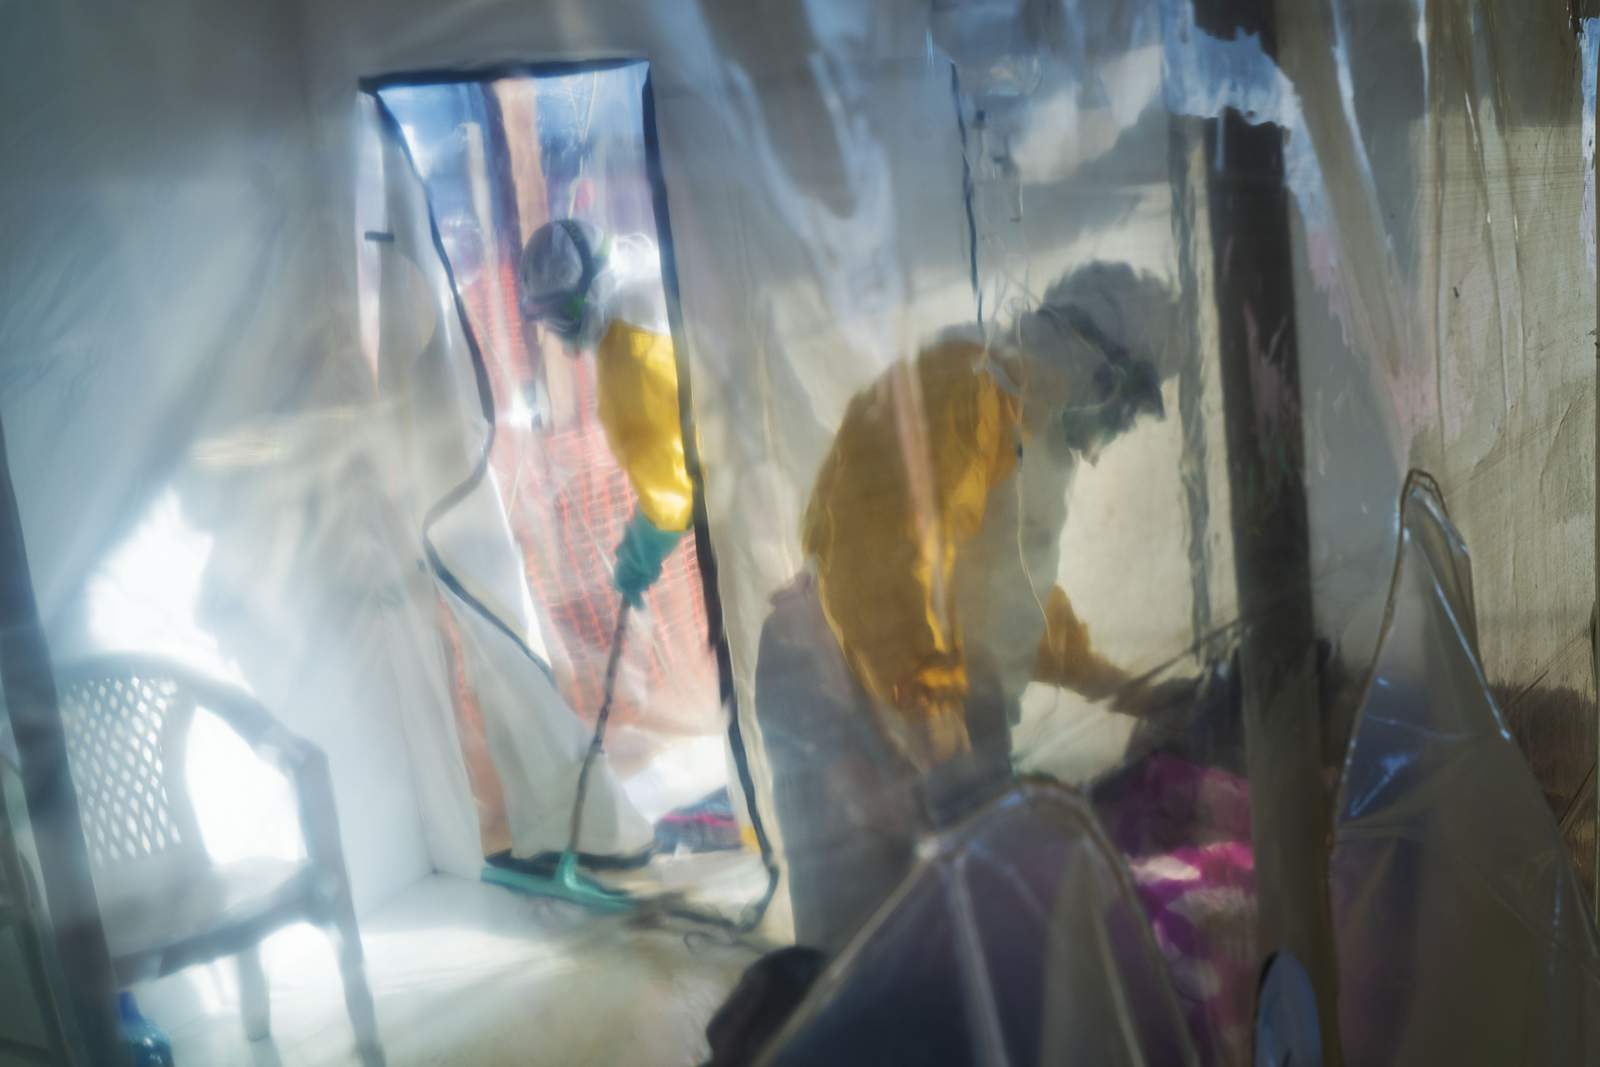 Man's Ebola relapse spawned dozens of new cases in Africa